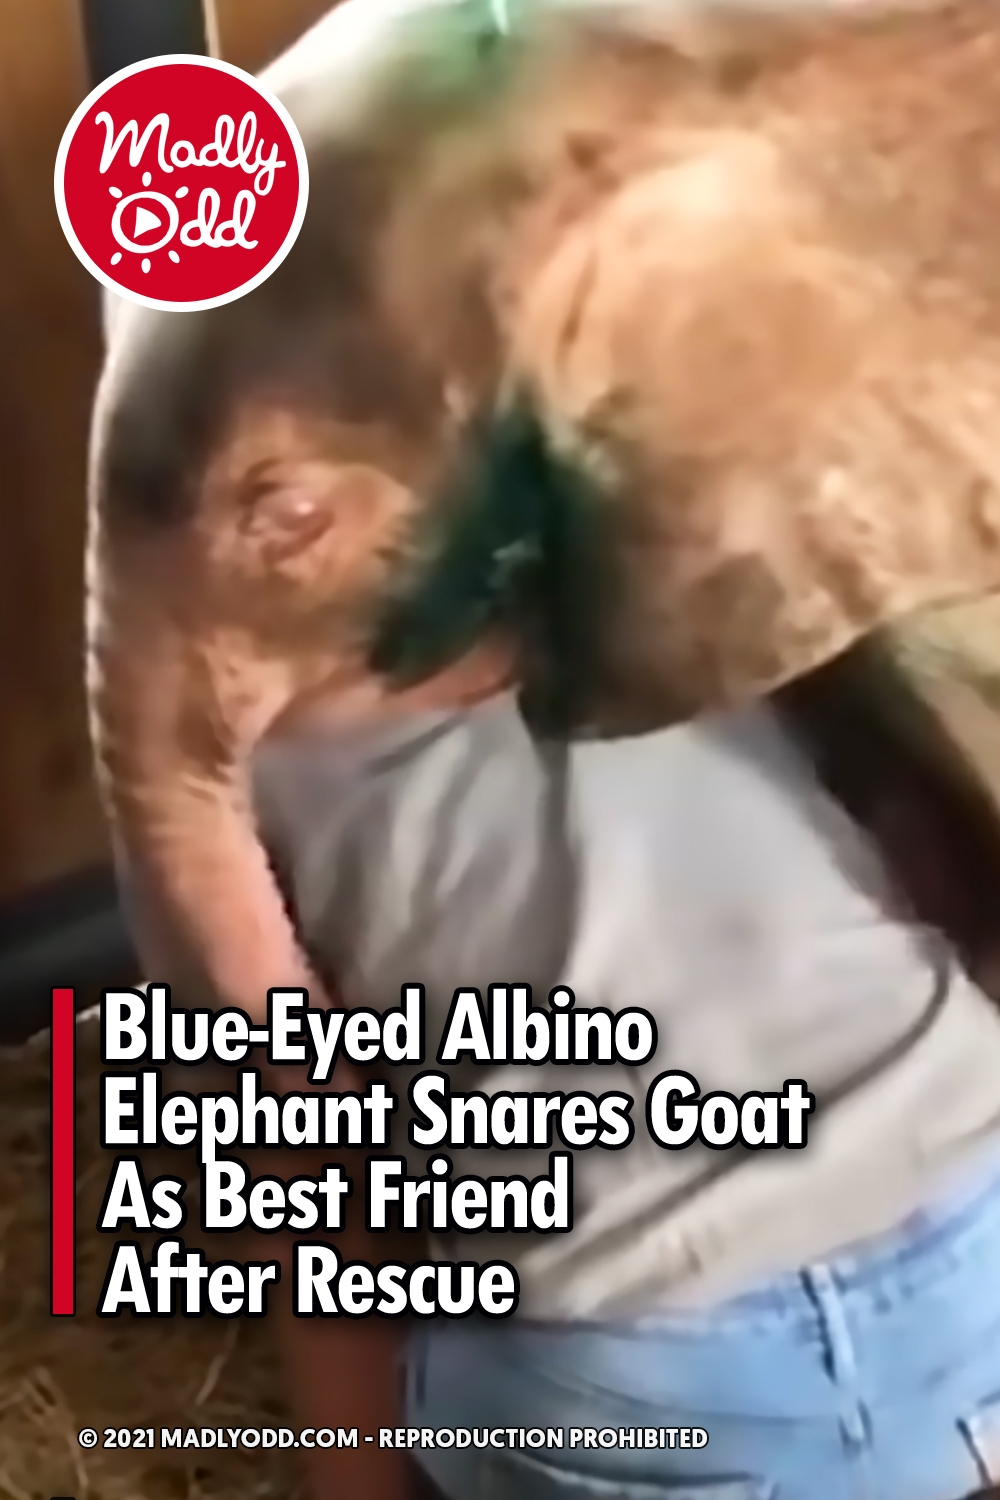 Blue-Eyed Albino Elephant Snares Goat As Best Friend After Rescue